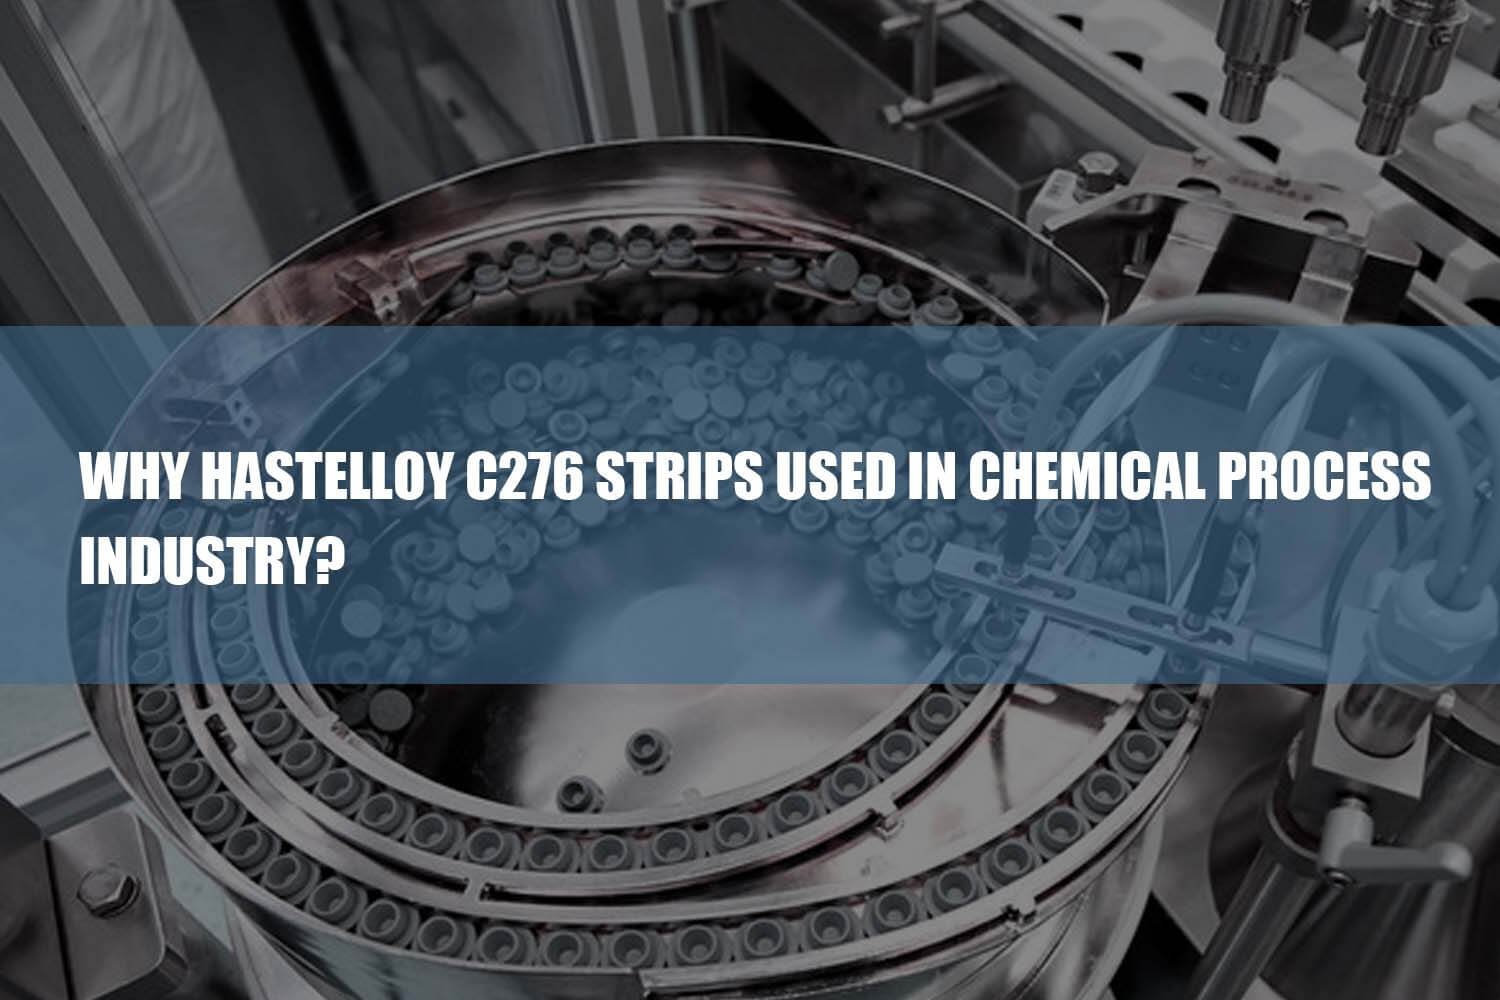 hastelloy c276 strips used in chemical process industry